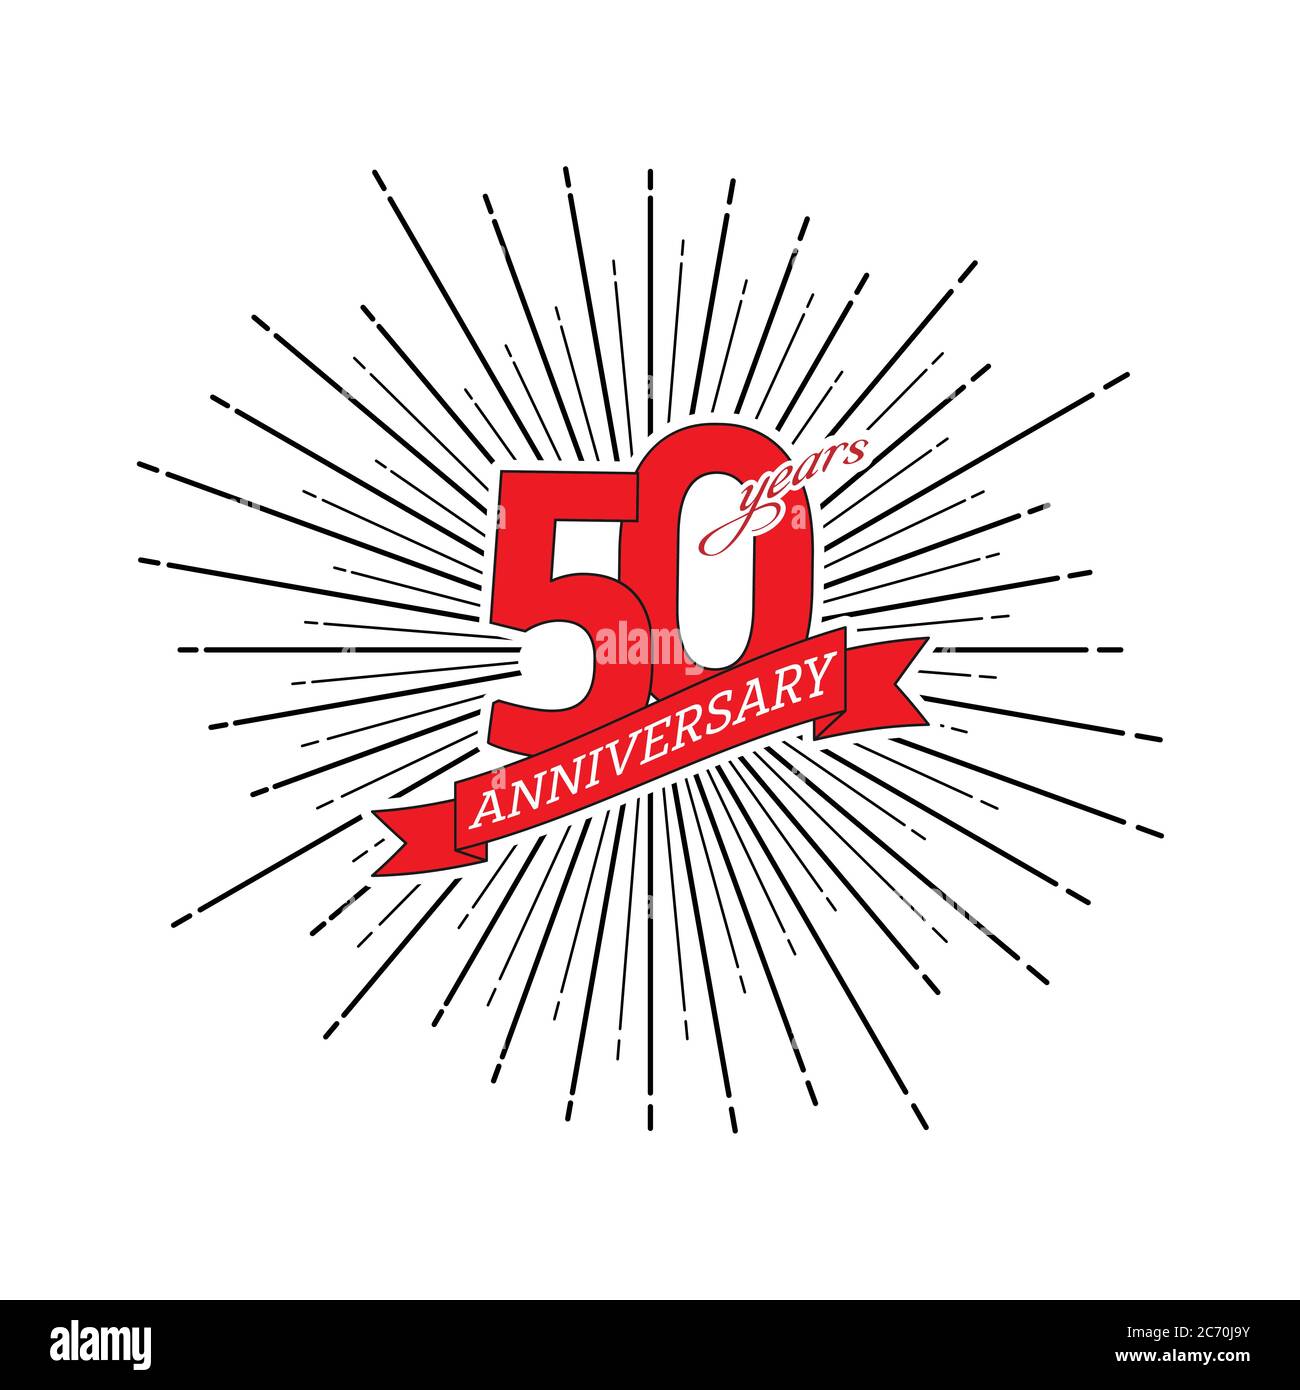 Template 50 years anniversary congratulations Cut Out Stock Images ...